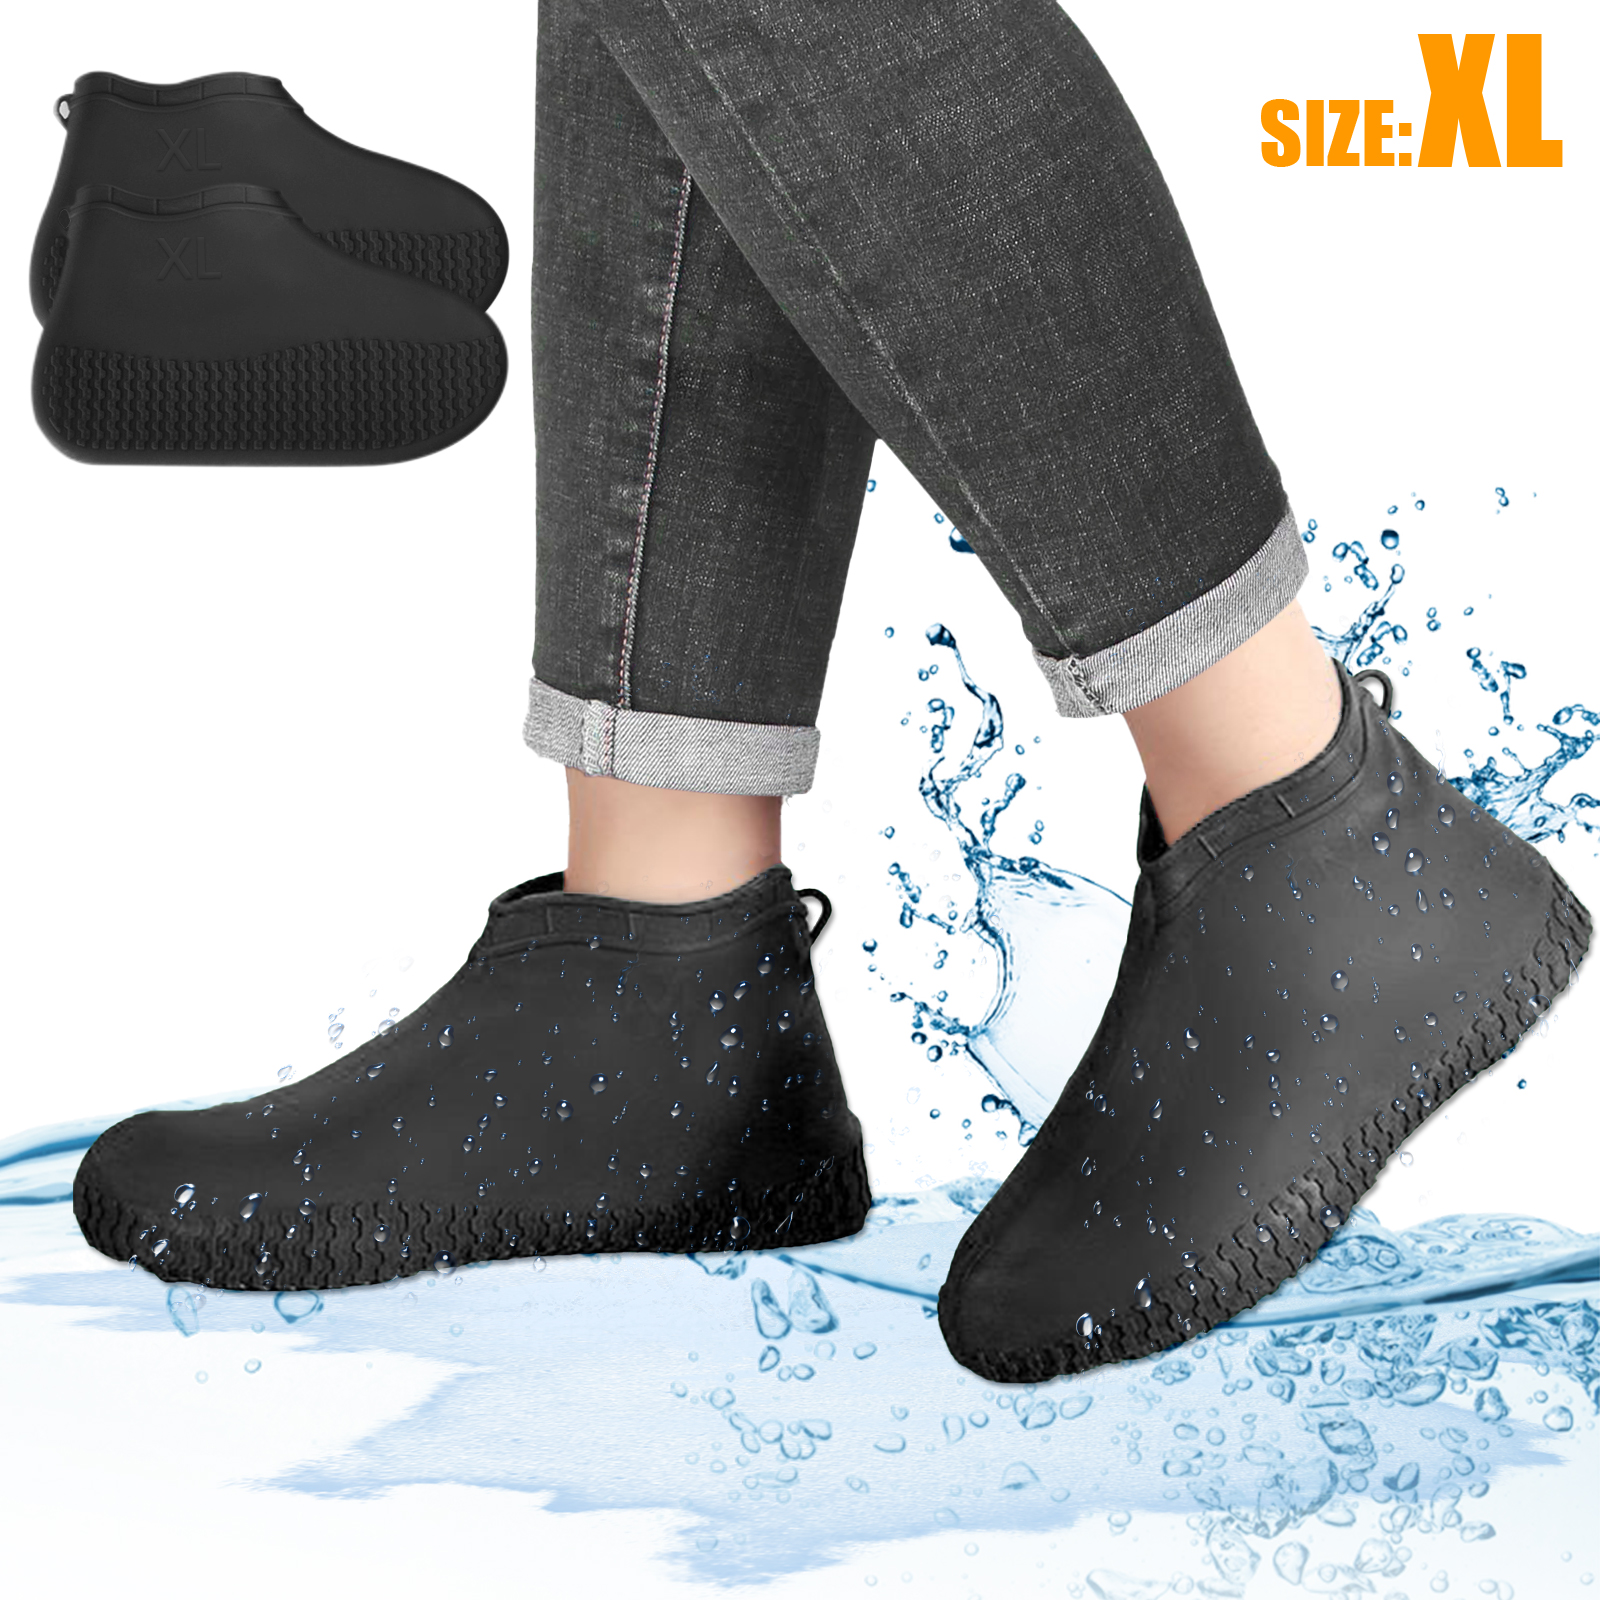 Silicone Overshoes Rain Waterproof Shoe Covers Boot Zipper Protector Adult Best 